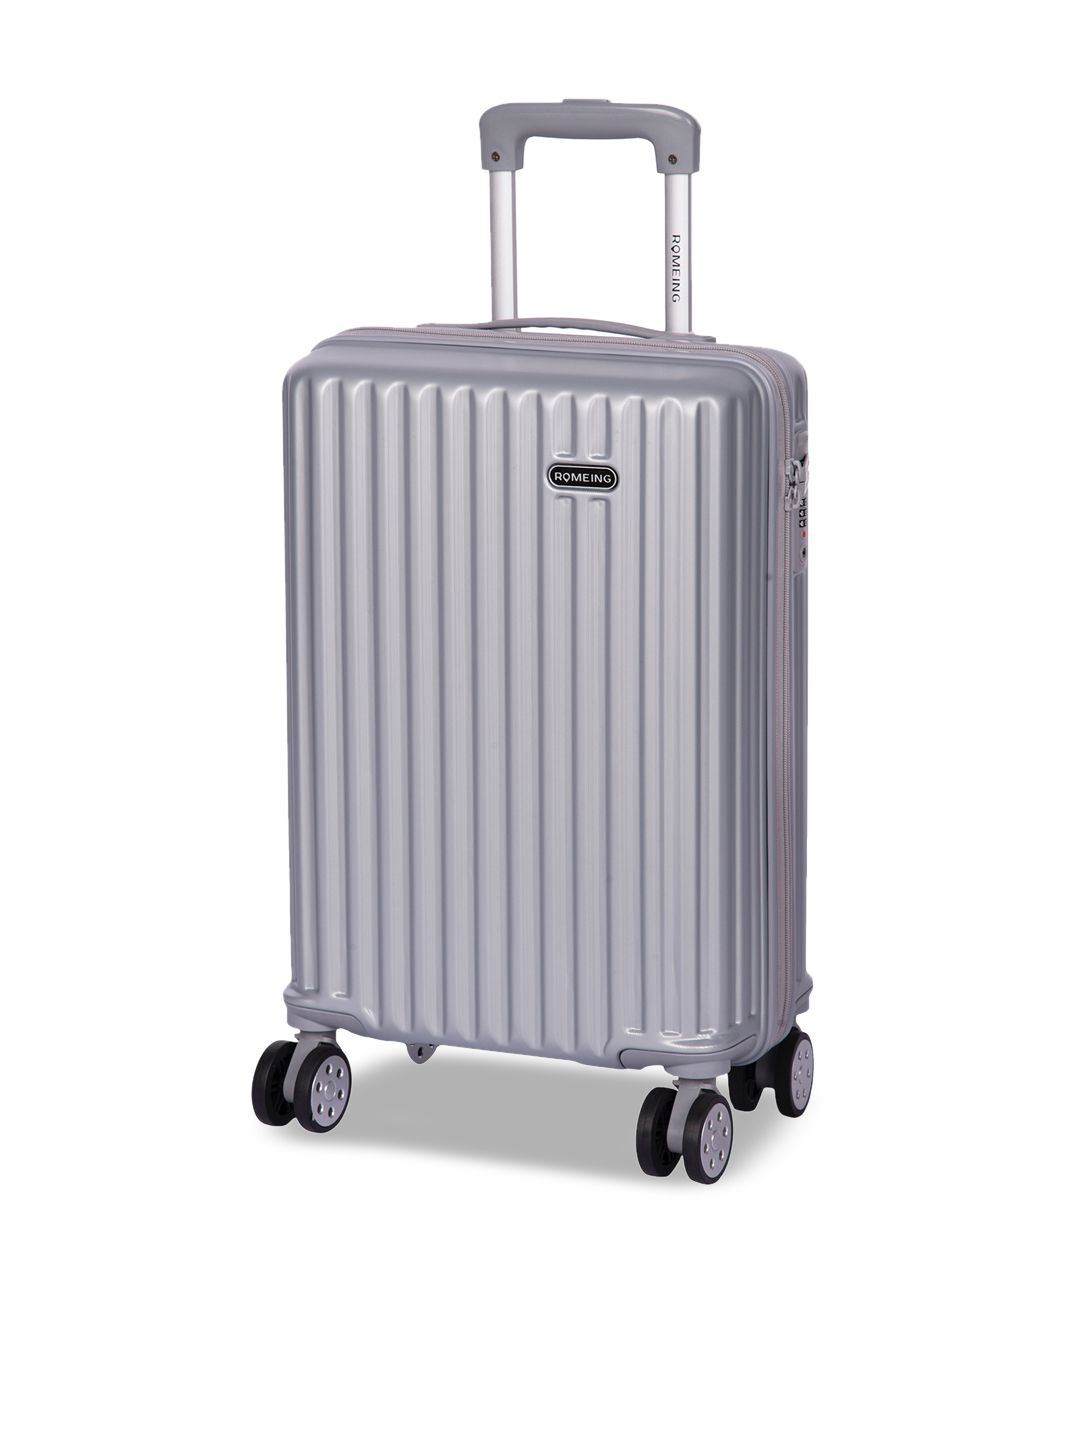 ROMEING Genoa Silver-Toned Polycarbonate Cabin Trolley Suitcase Price in India